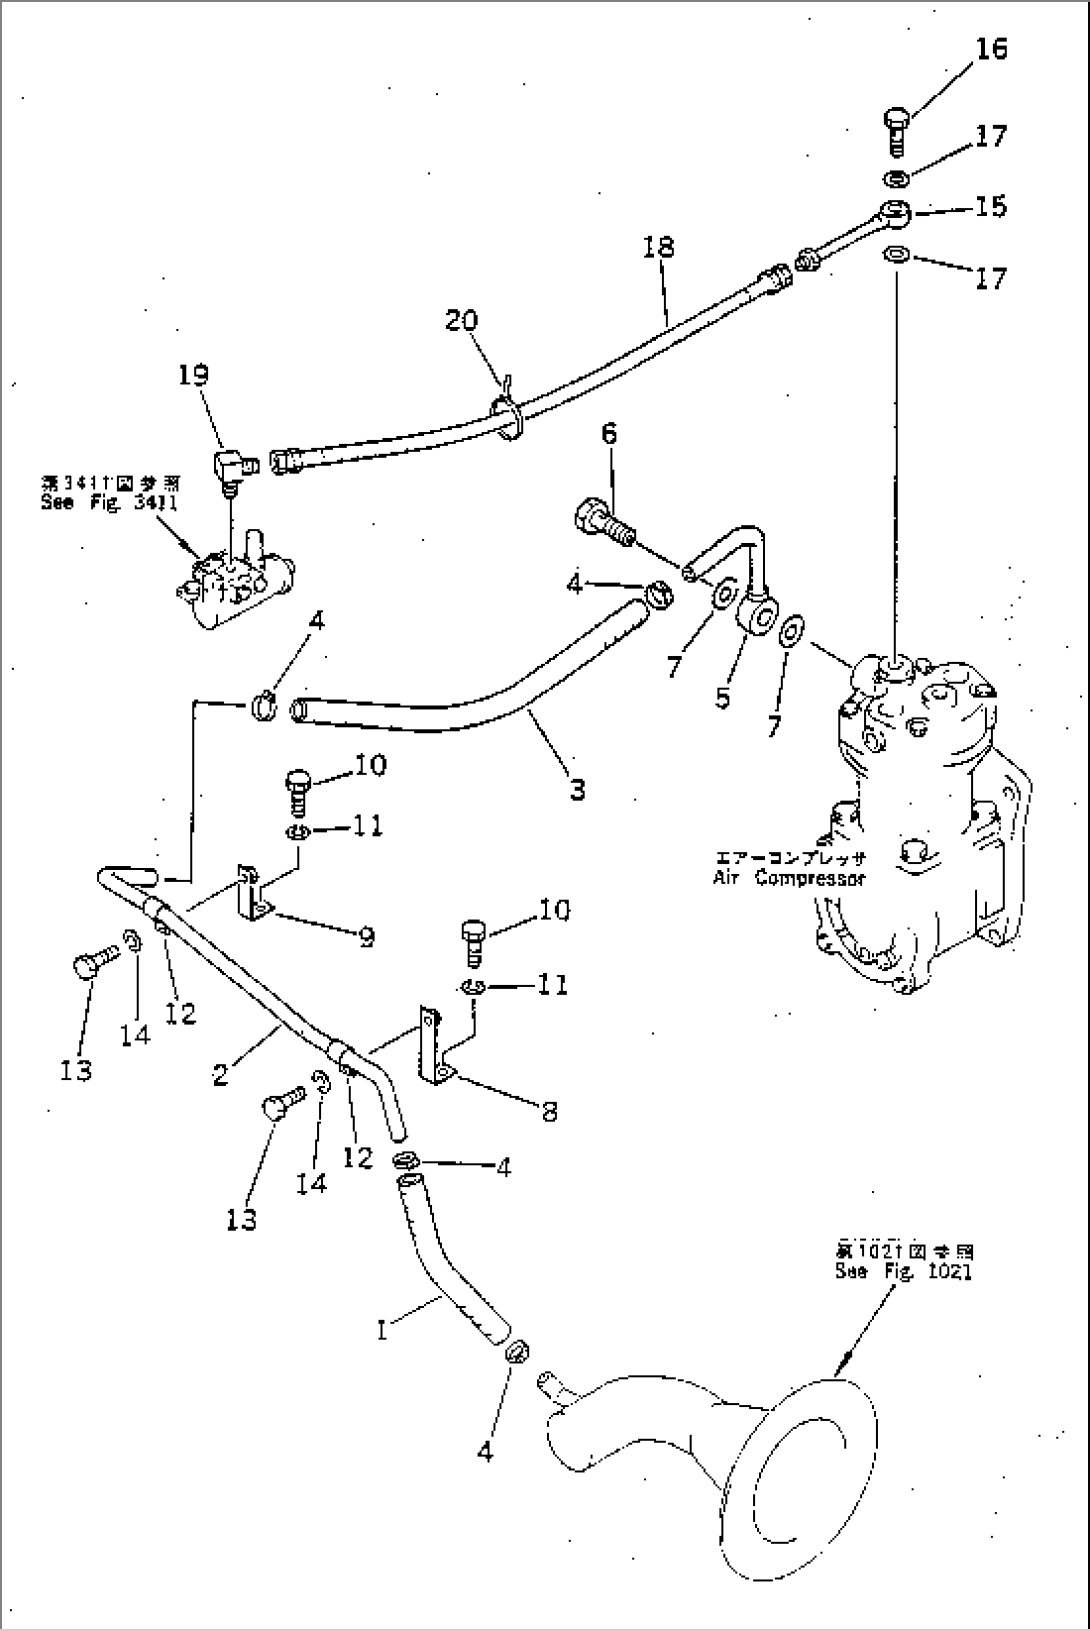 AIR PIPING (AIR COMPRESSOR TO GOVERNOR)